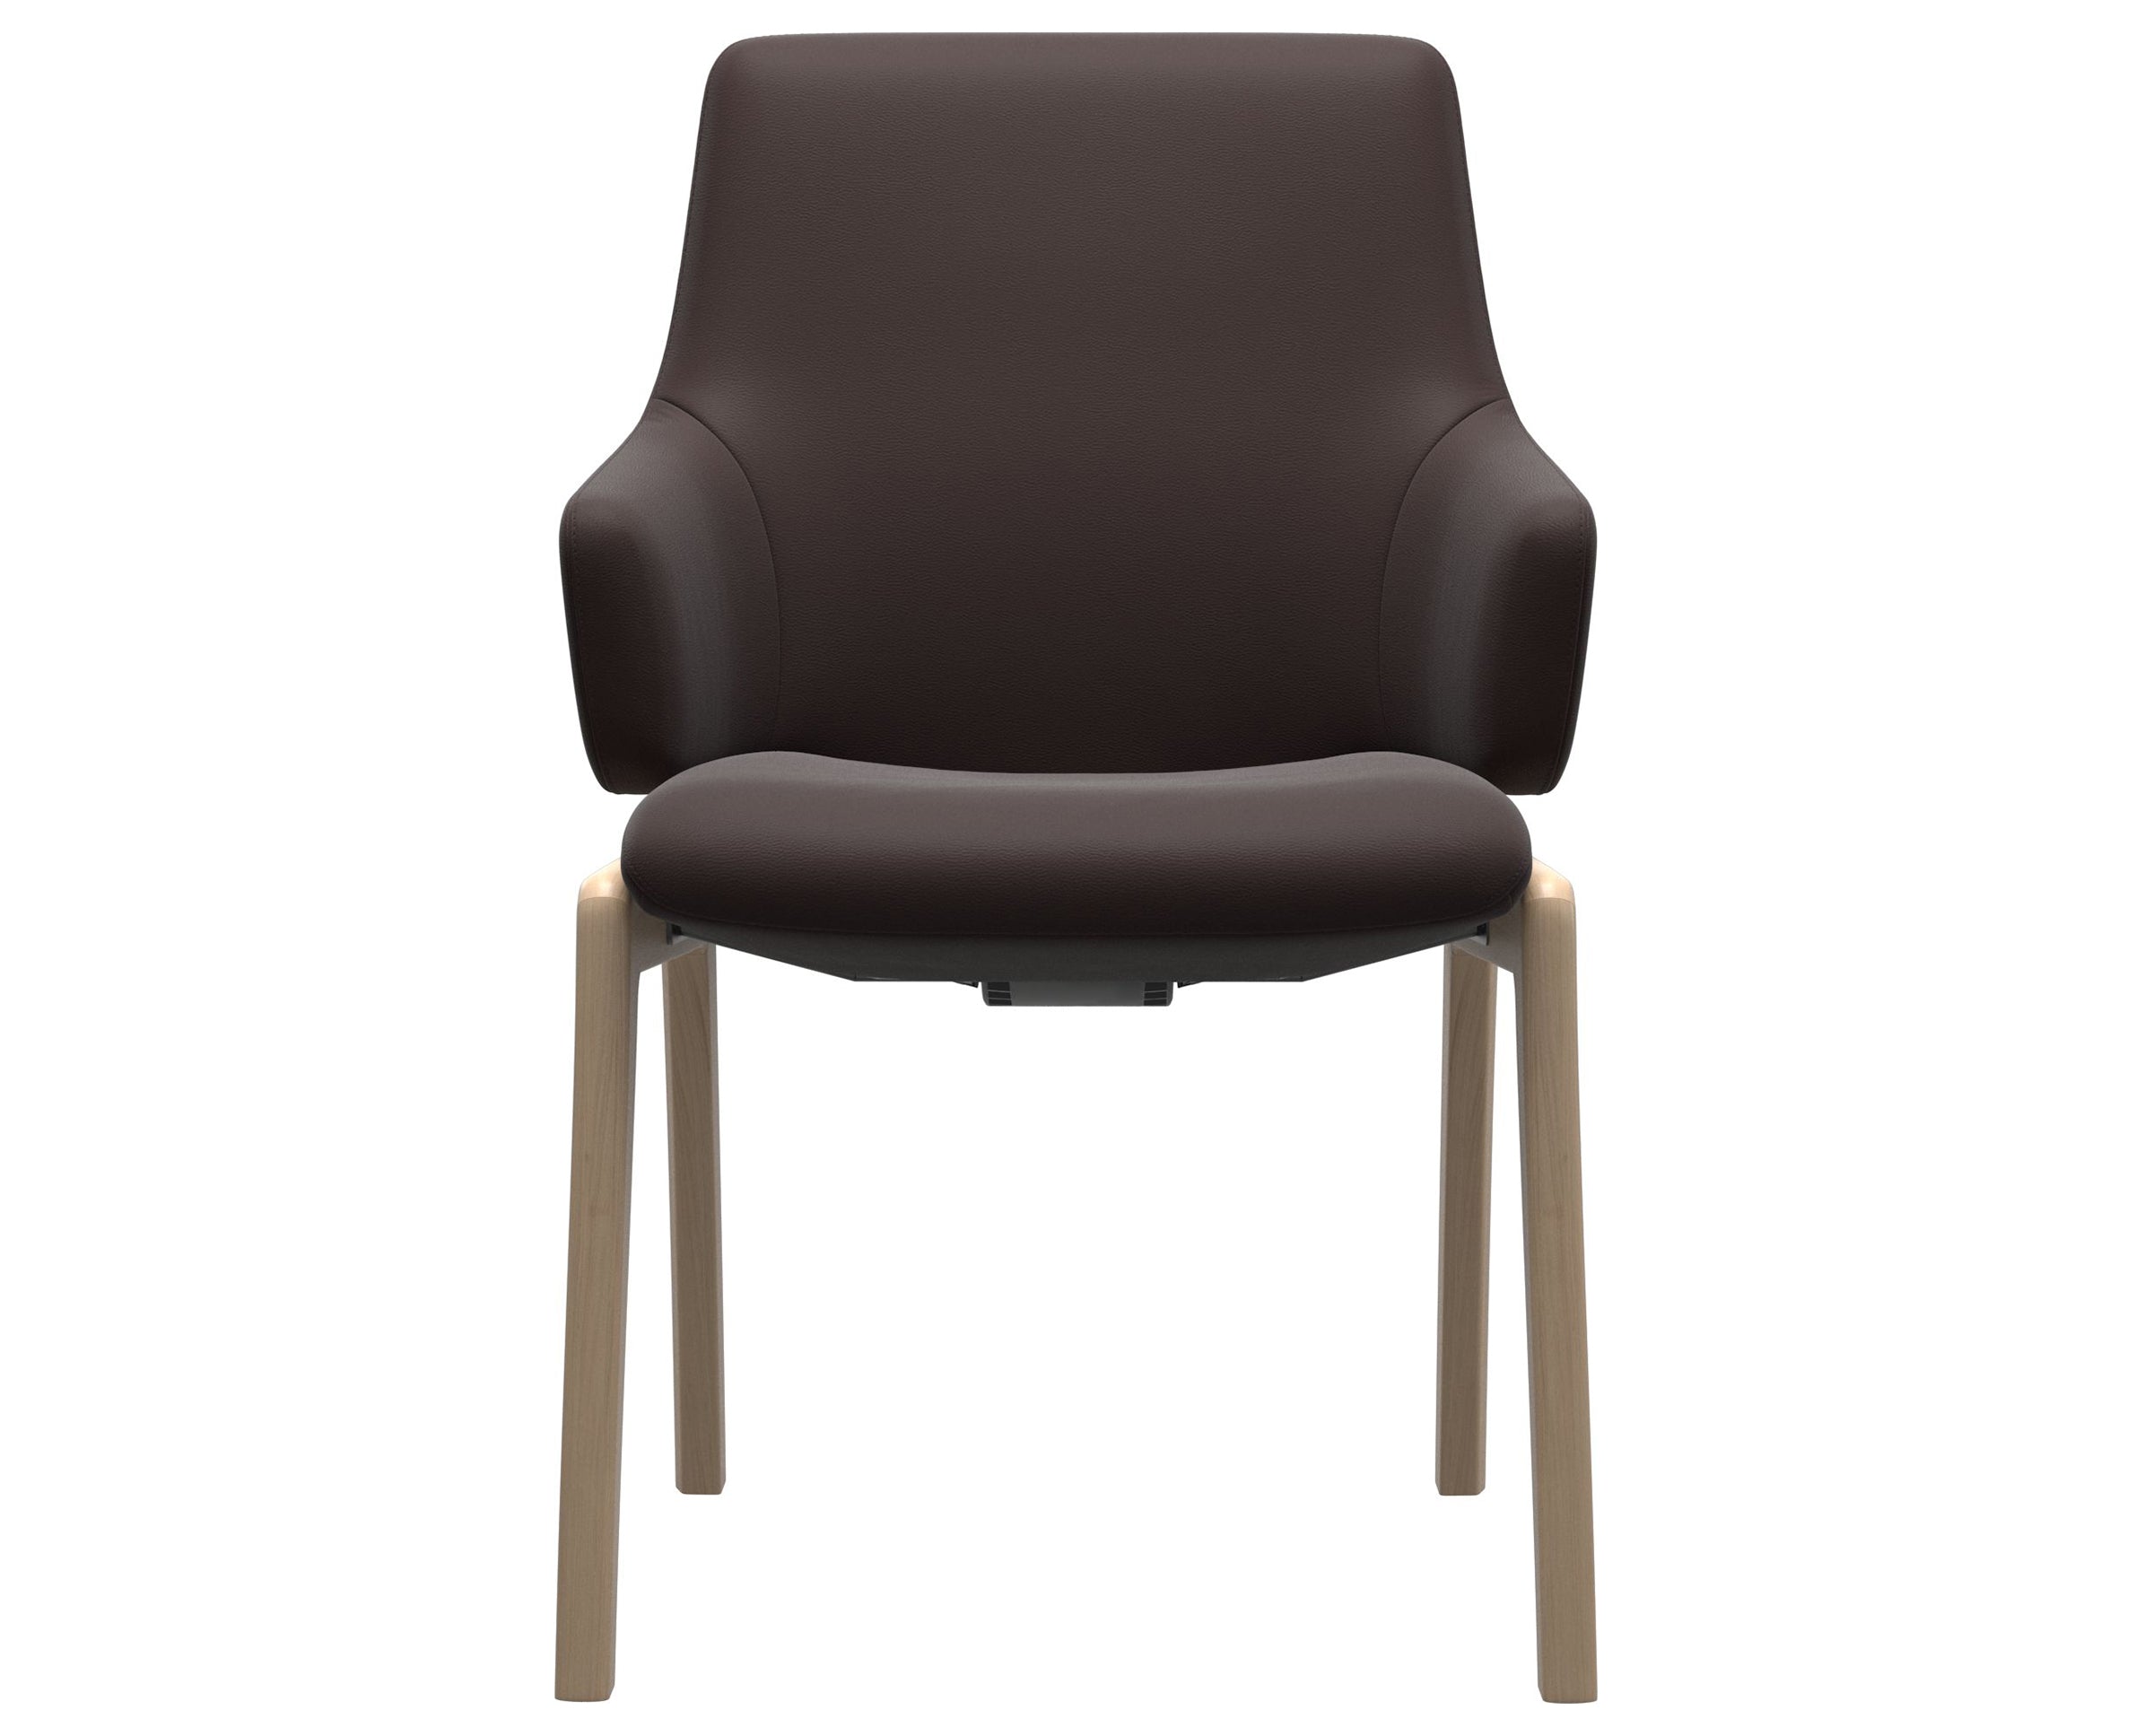 Paloma Leather Chocolate and Natural Base | Stressless Laurel Low Back D100 Dining Chair w/Arms | Valley Ridge Furniture